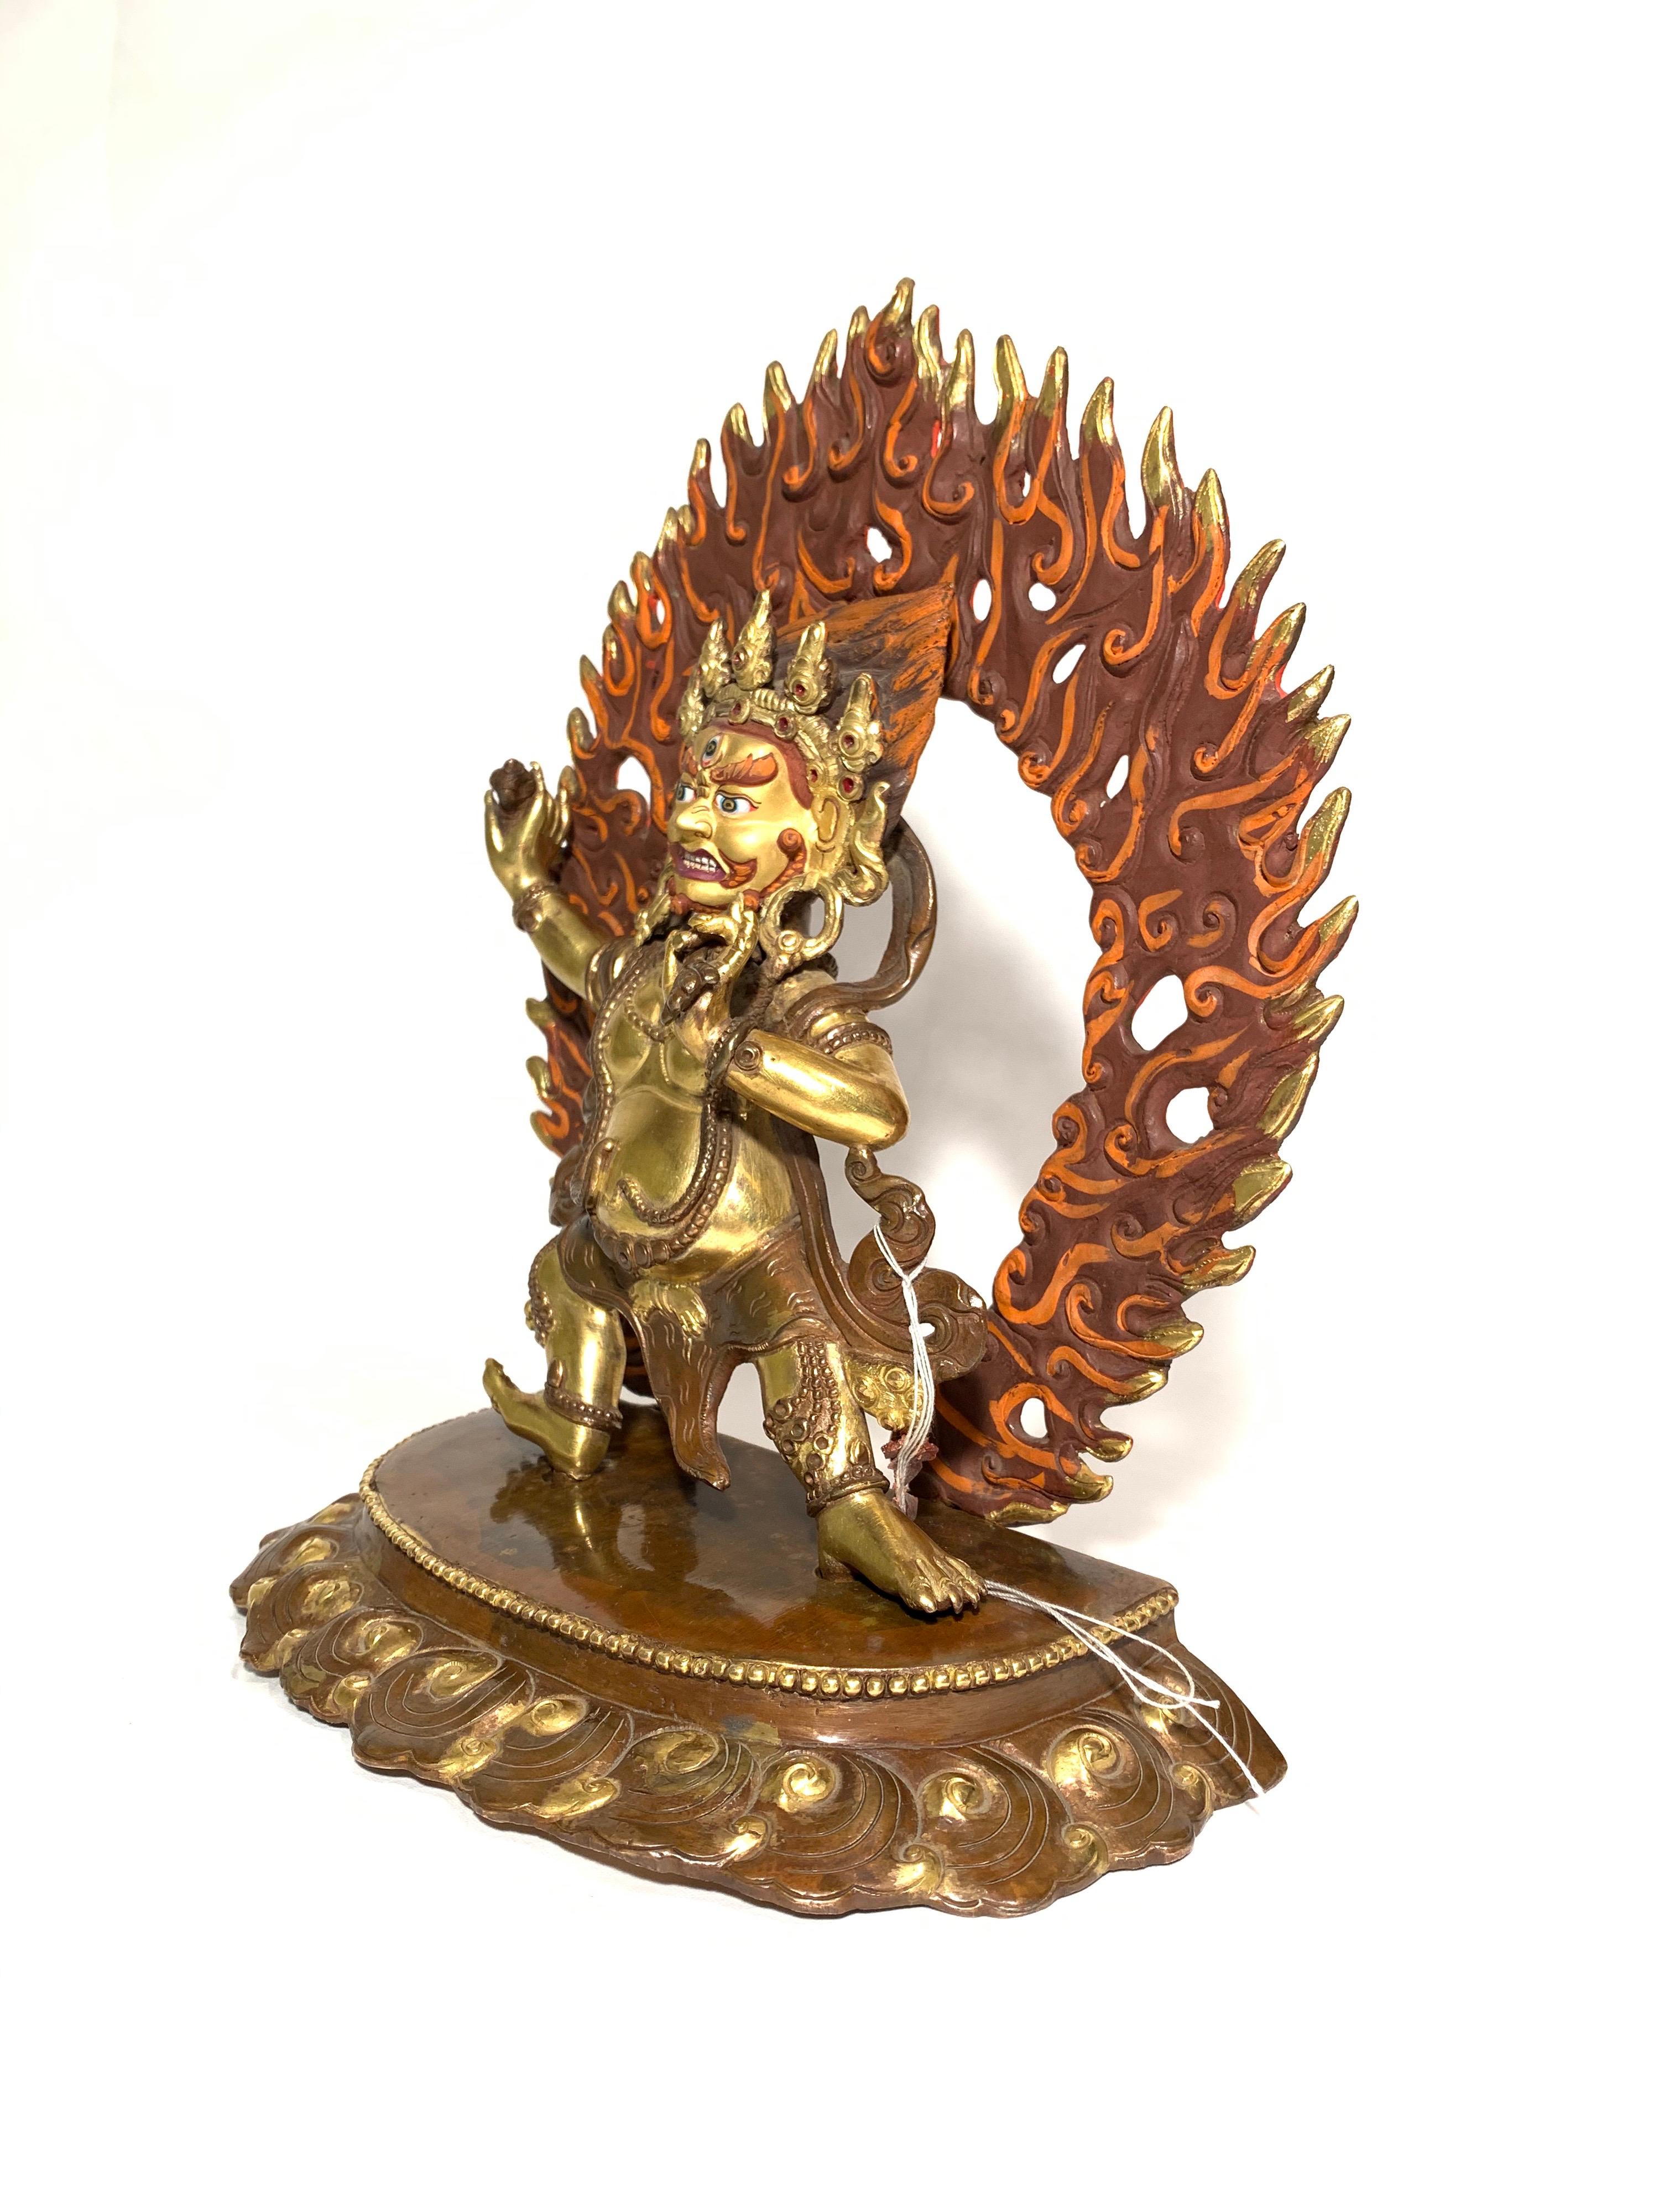 Vajrapani Statue 10 Inch with 24K Gold Handcrafted by Lost Wax Process - Sculpture by Unknown